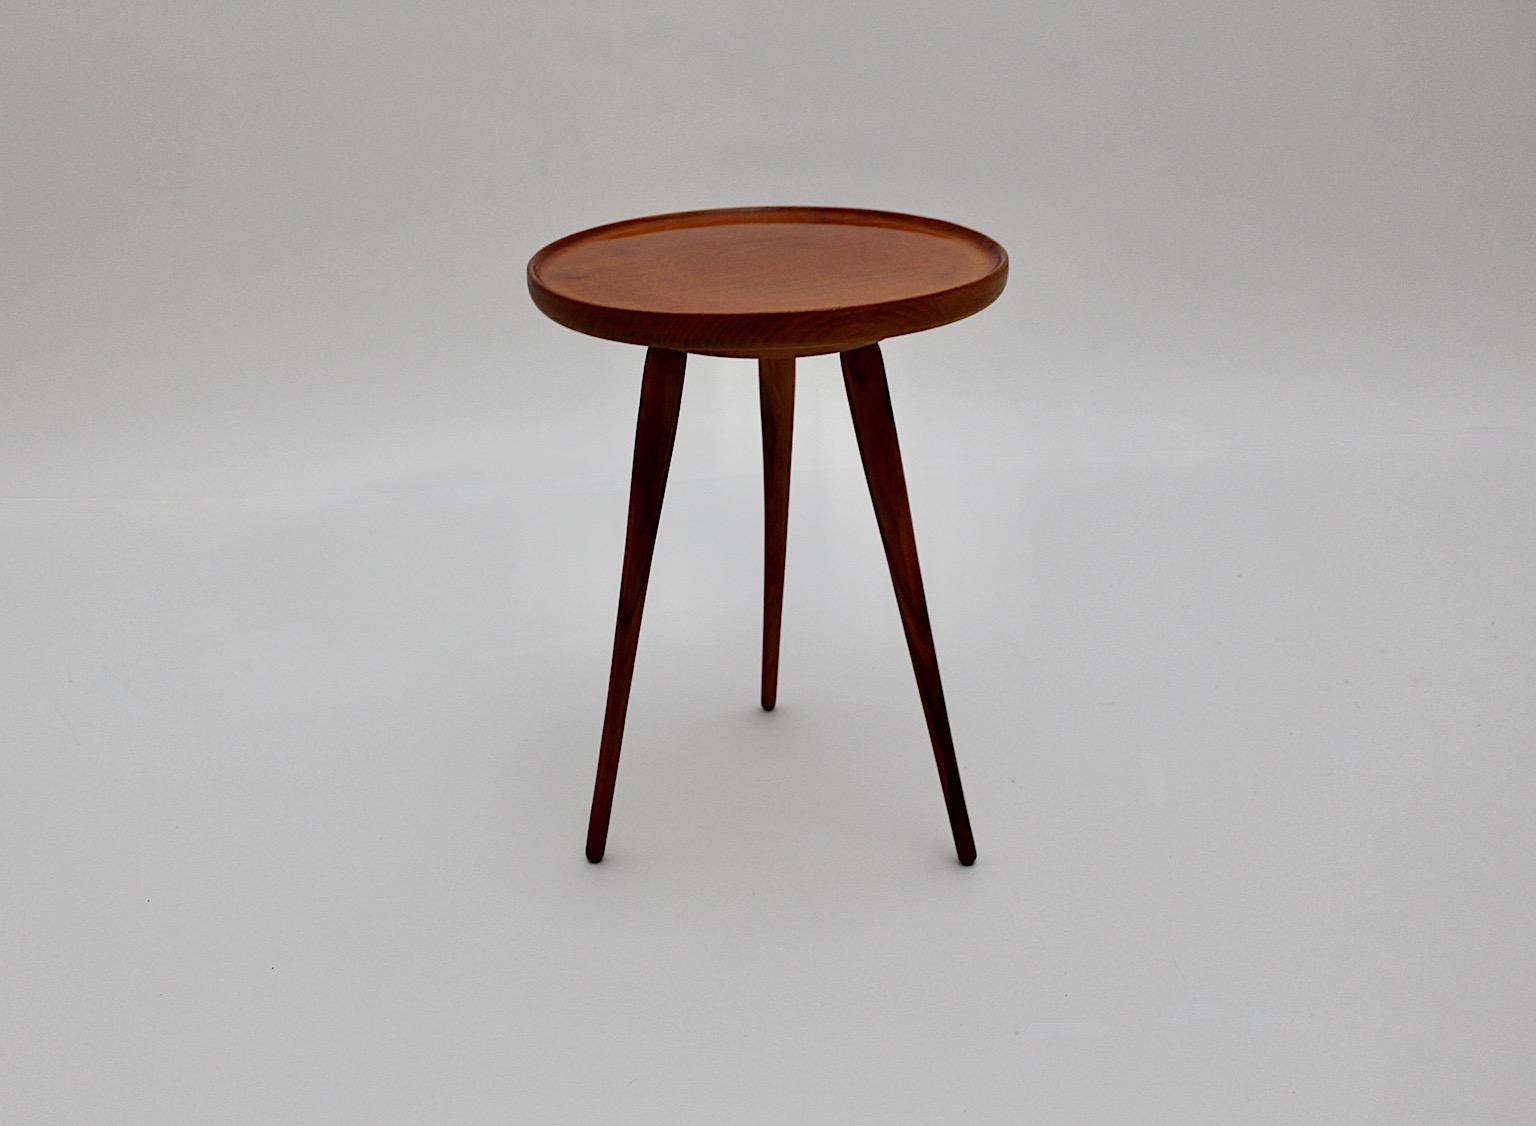 20th Century Mid-Century Modern Vintage Tiny Walnut Flower Stand Side Table, 1950s, Austria For Sale